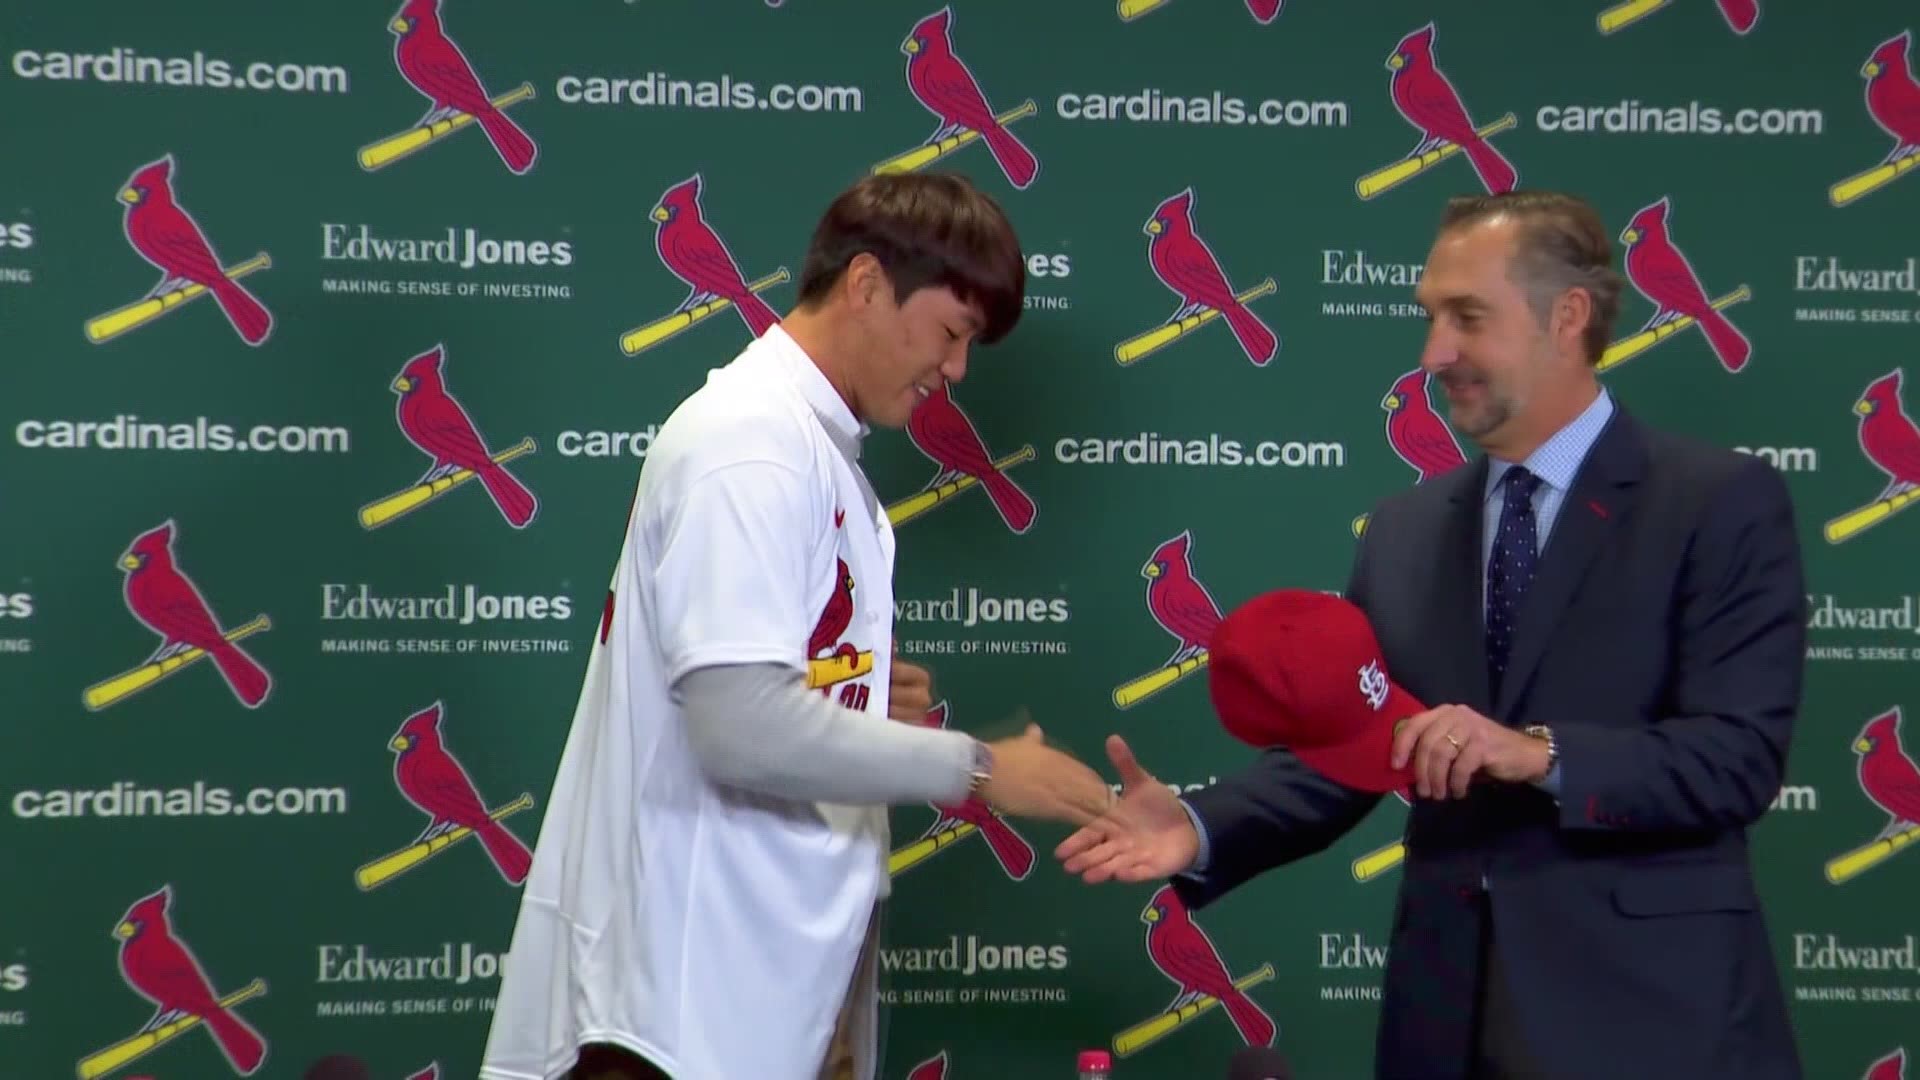 He's now one of the most important people in St. Louis, but it wasn't that long ago that John Mozeliak was just looking for a shot in baseball.